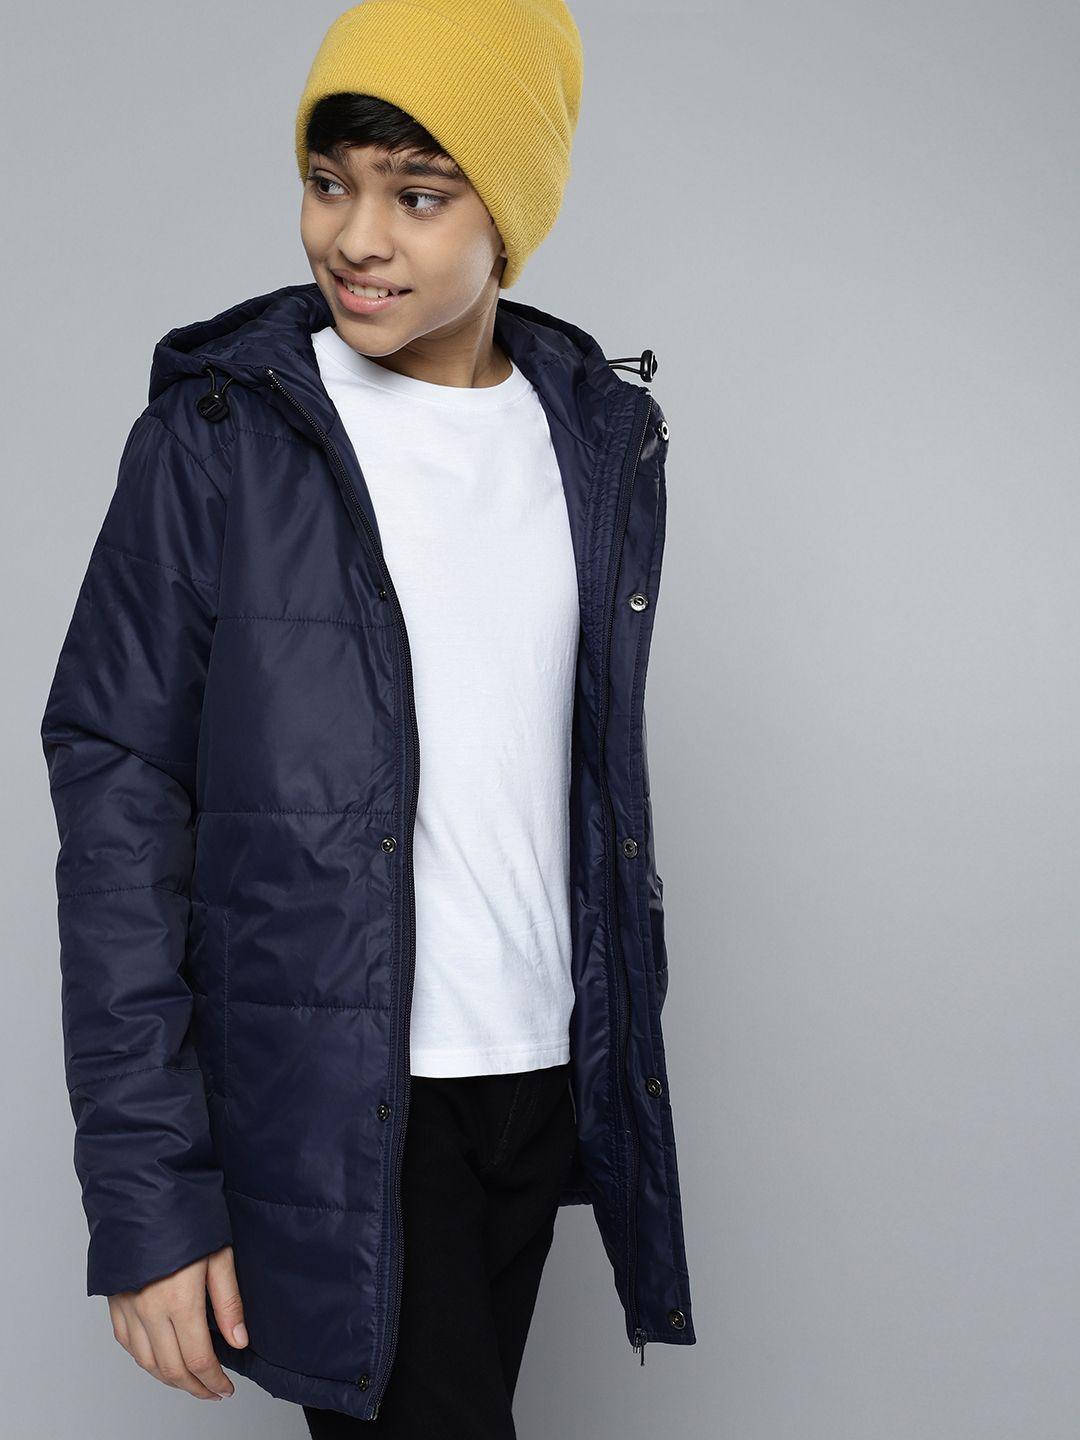 here&now boys navy blue solid puffer jacket